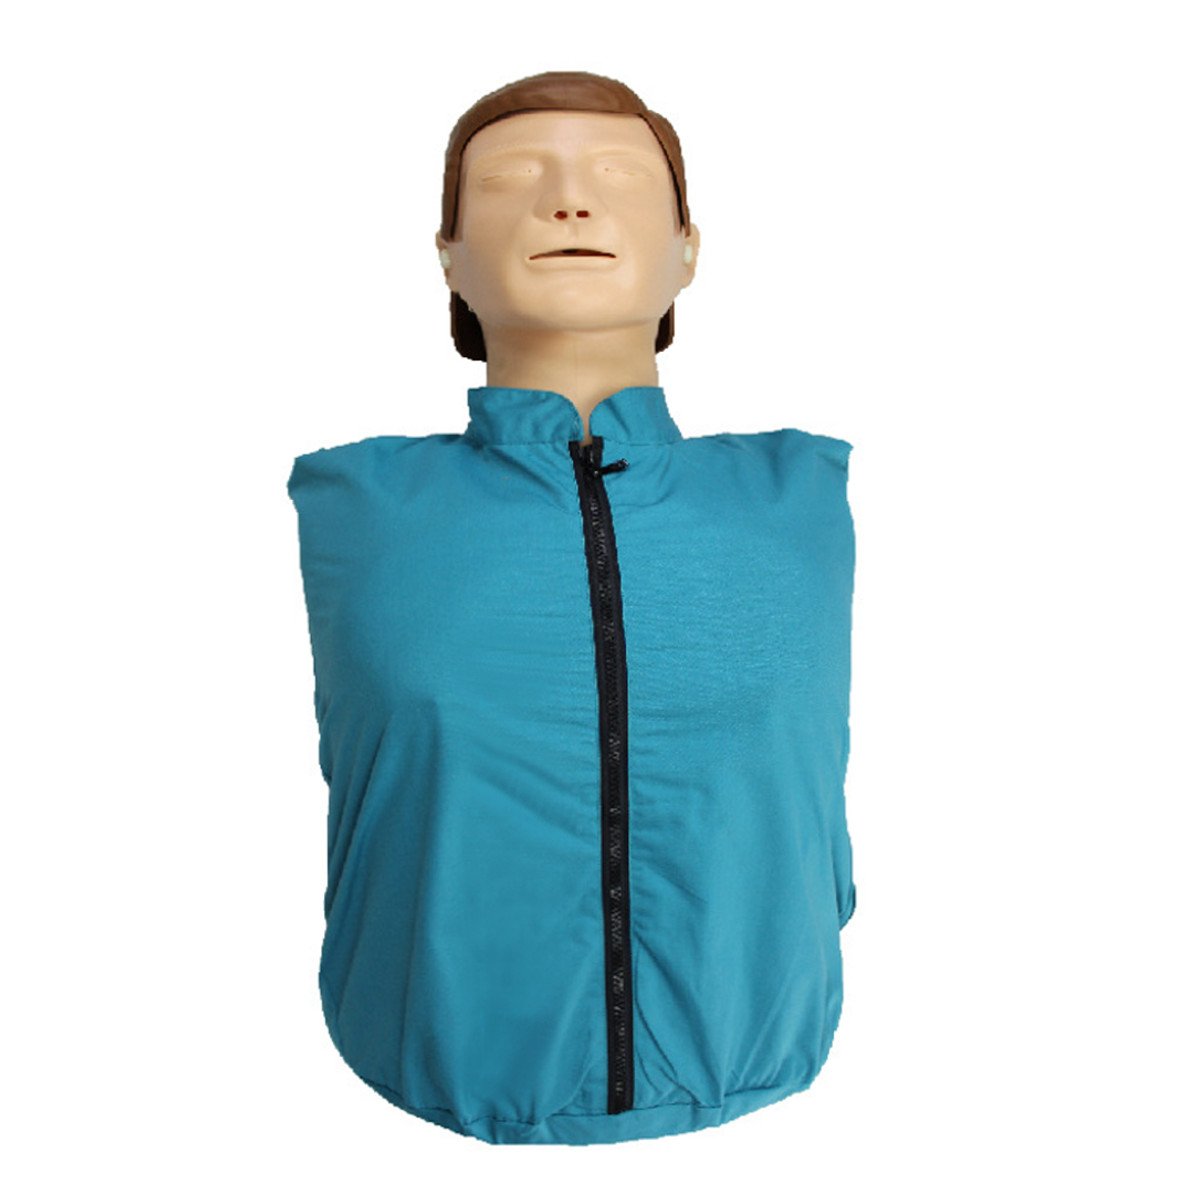 CPR Adult Manikin AED First Aid Training Dummy Training Medical Model Respiration Human 2